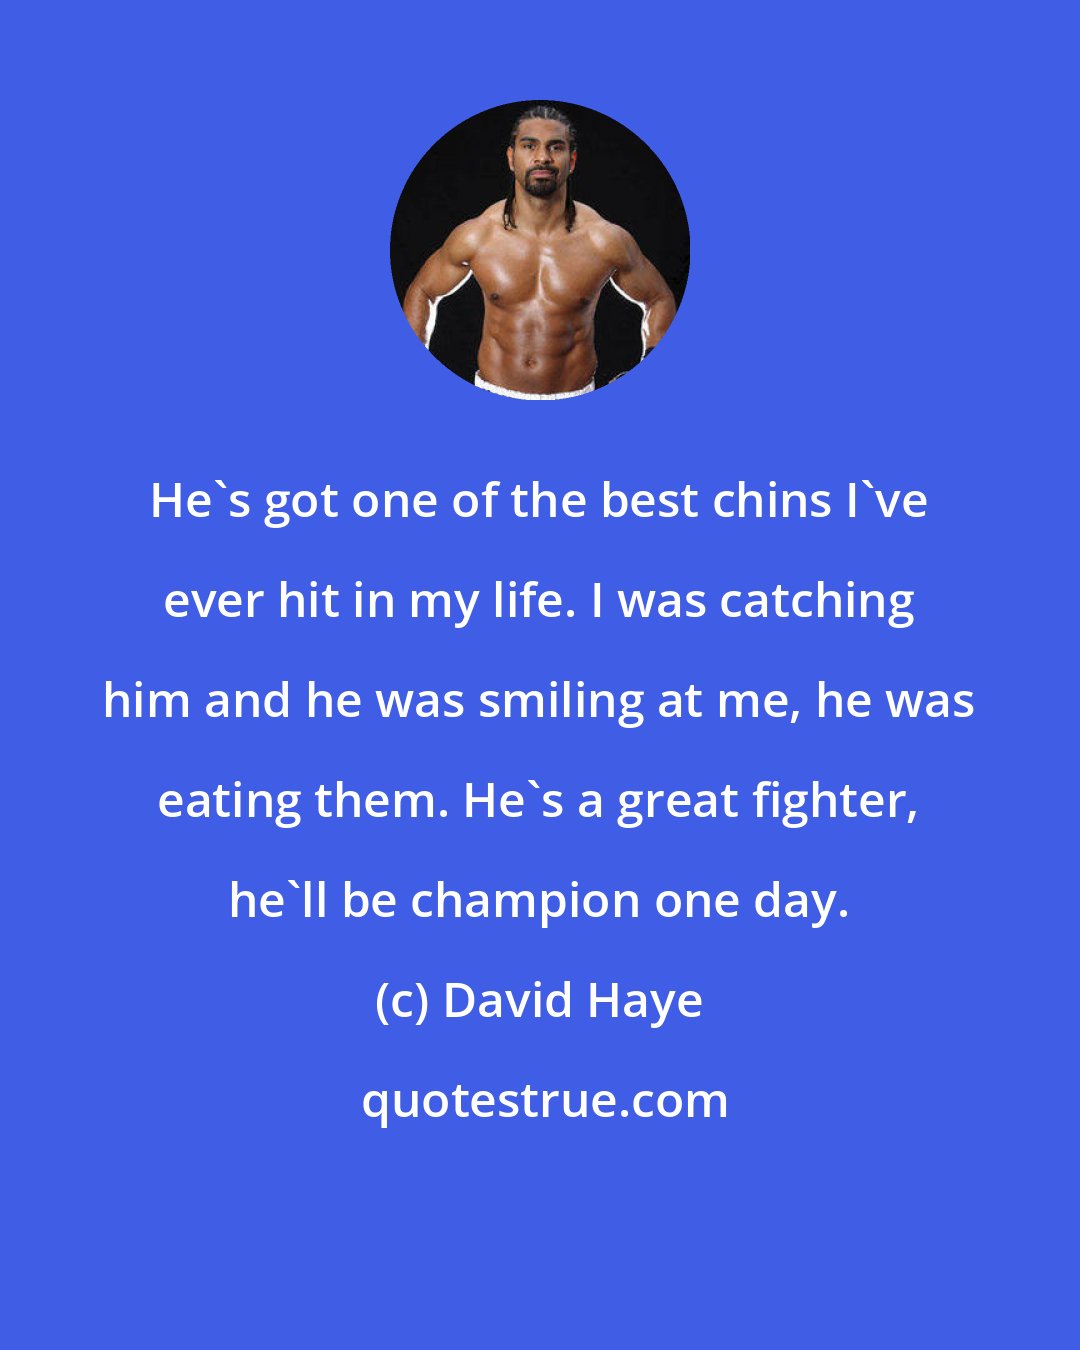 David Haye: He's got one of the best chins I've ever hit in my life. I was catching him and he was smiling at me, he was eating them. He's a great fighter, he'll be champion one day.